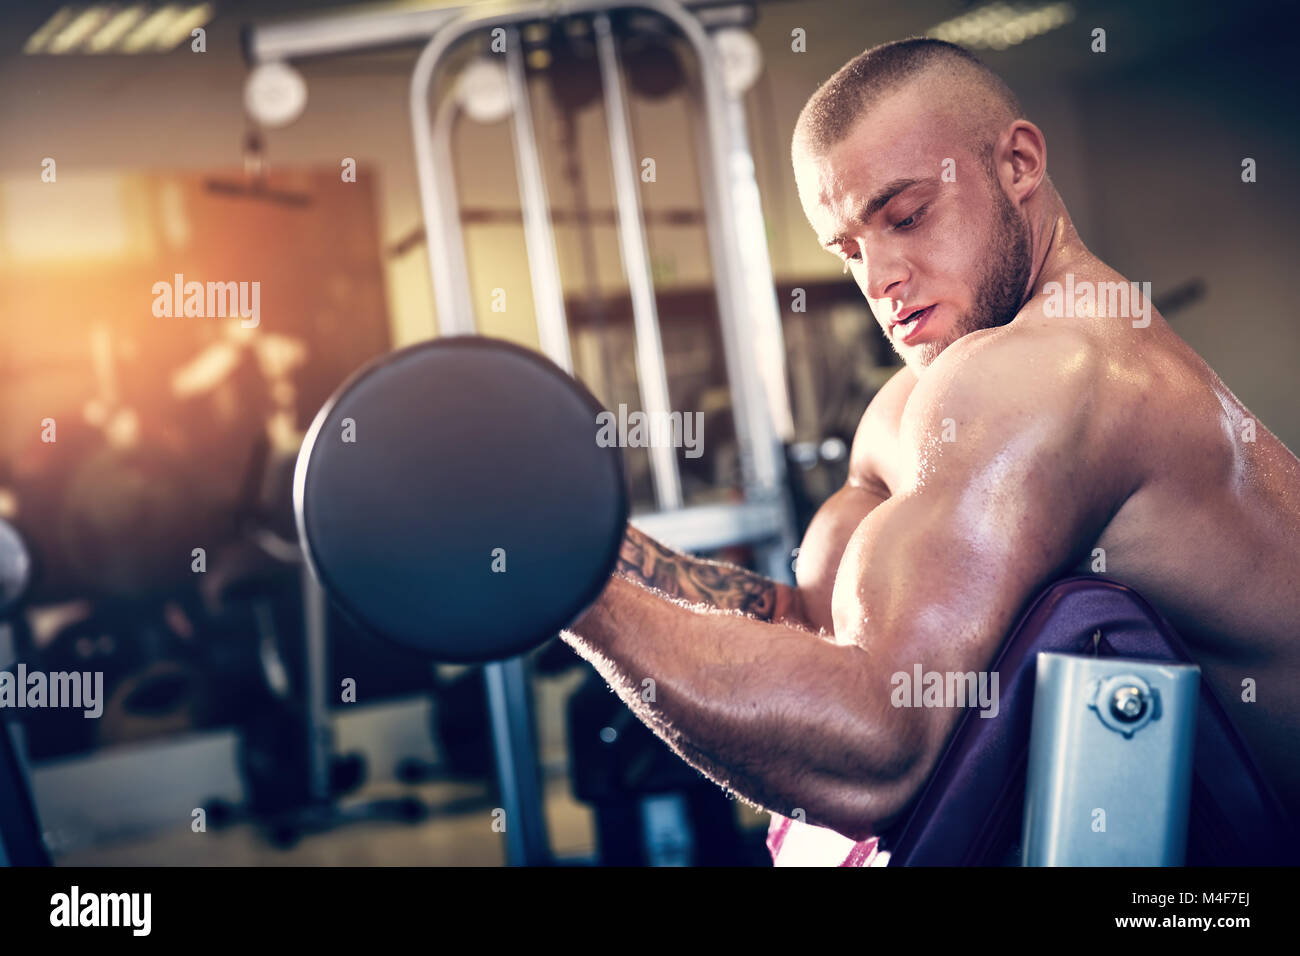 Muscular man working out at a gym. Stock Photo